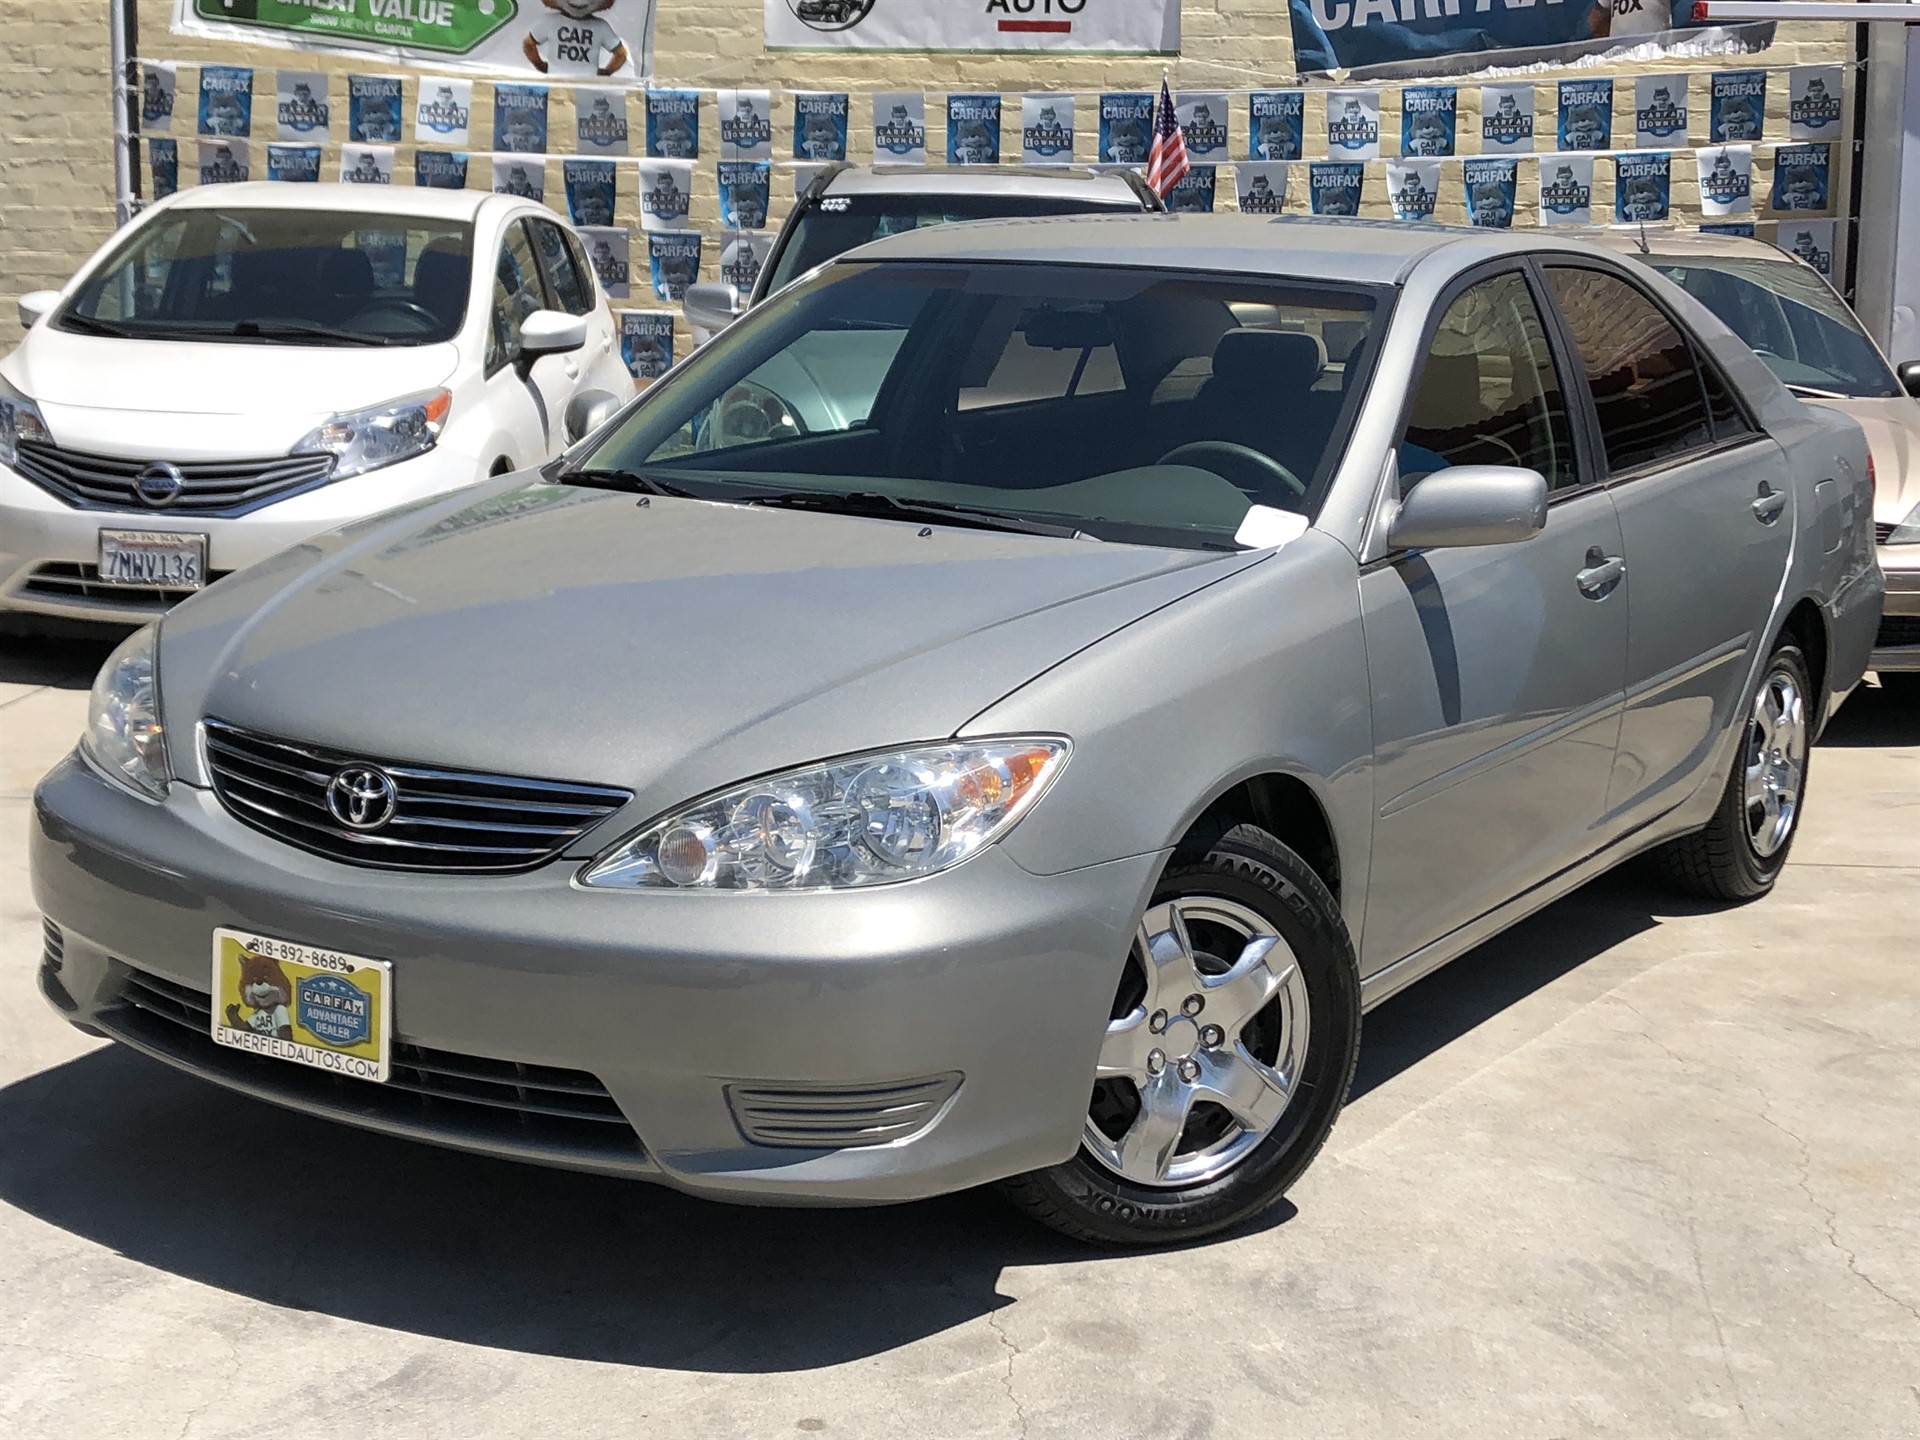 2006 Toyota Camry LE - Low Miles! Well Maintained!